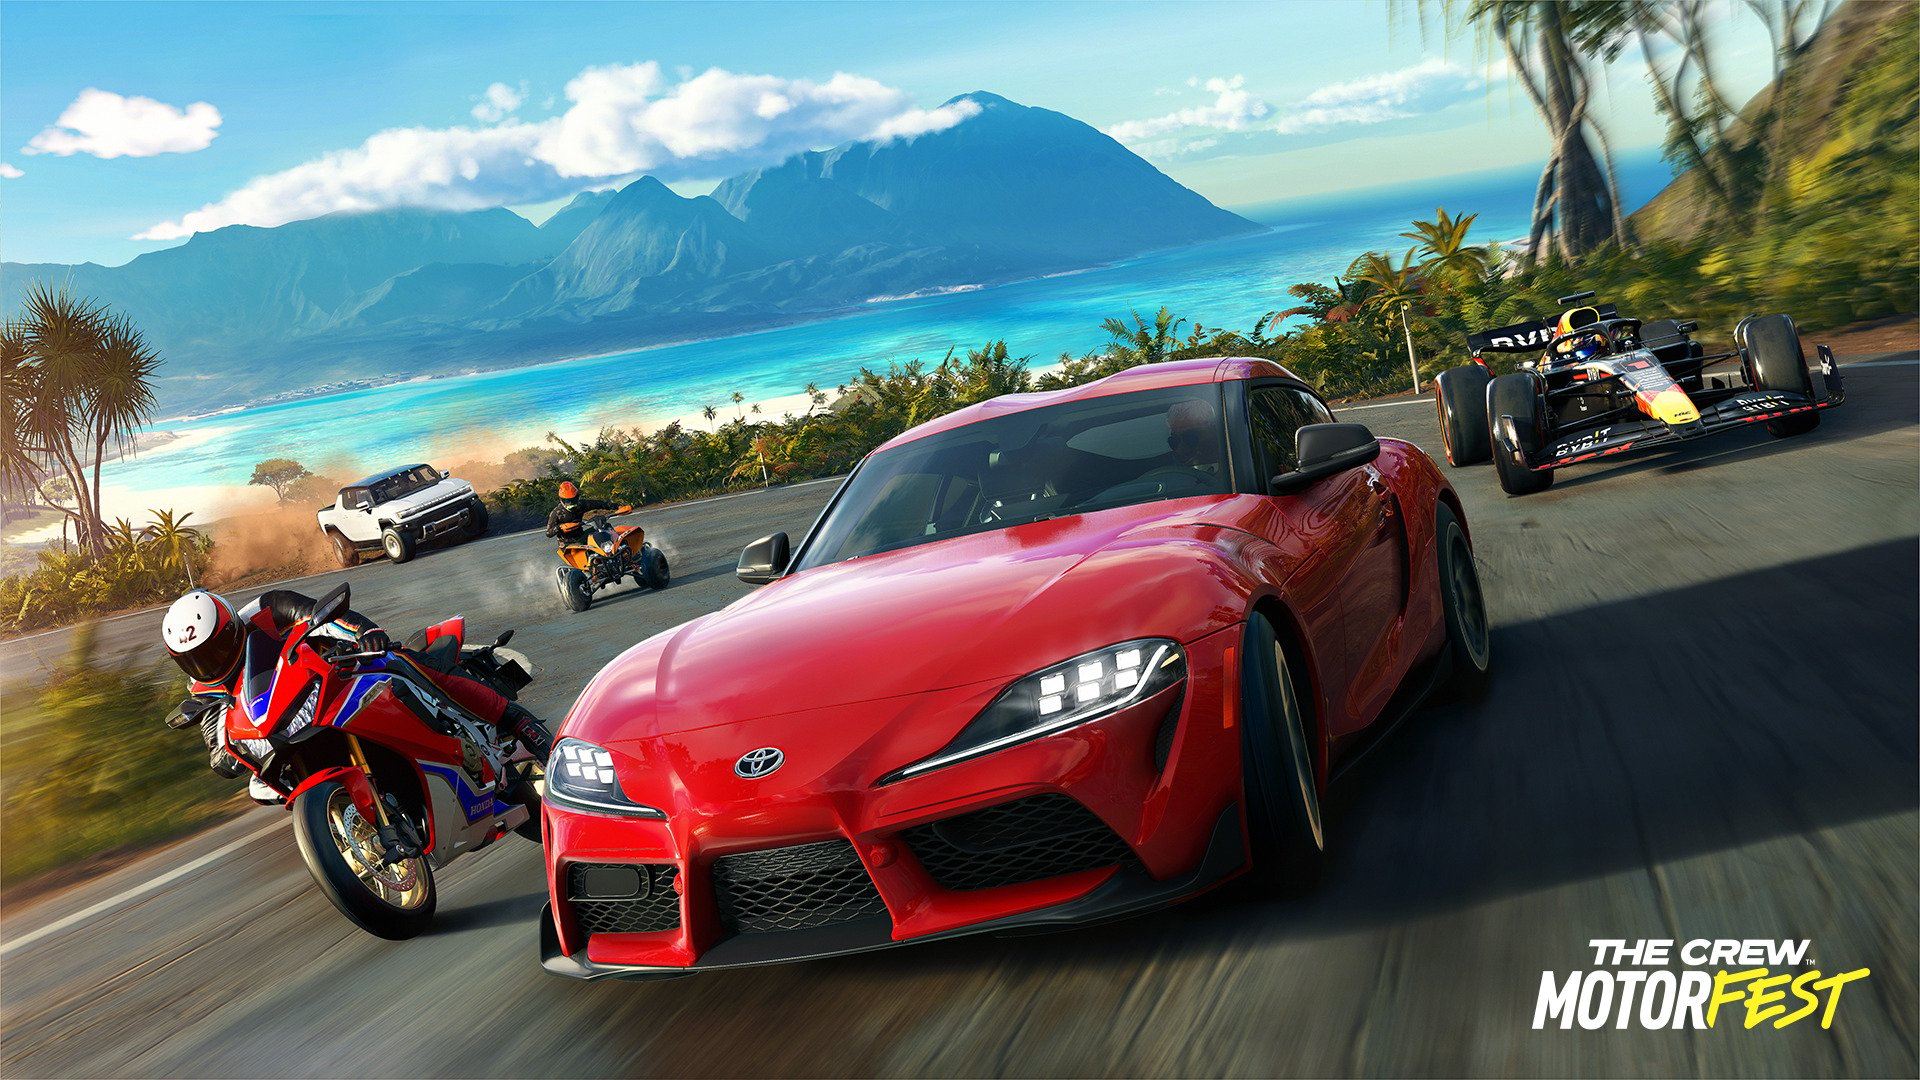 The Crew Motorfest is Out Now on PC, Consoles